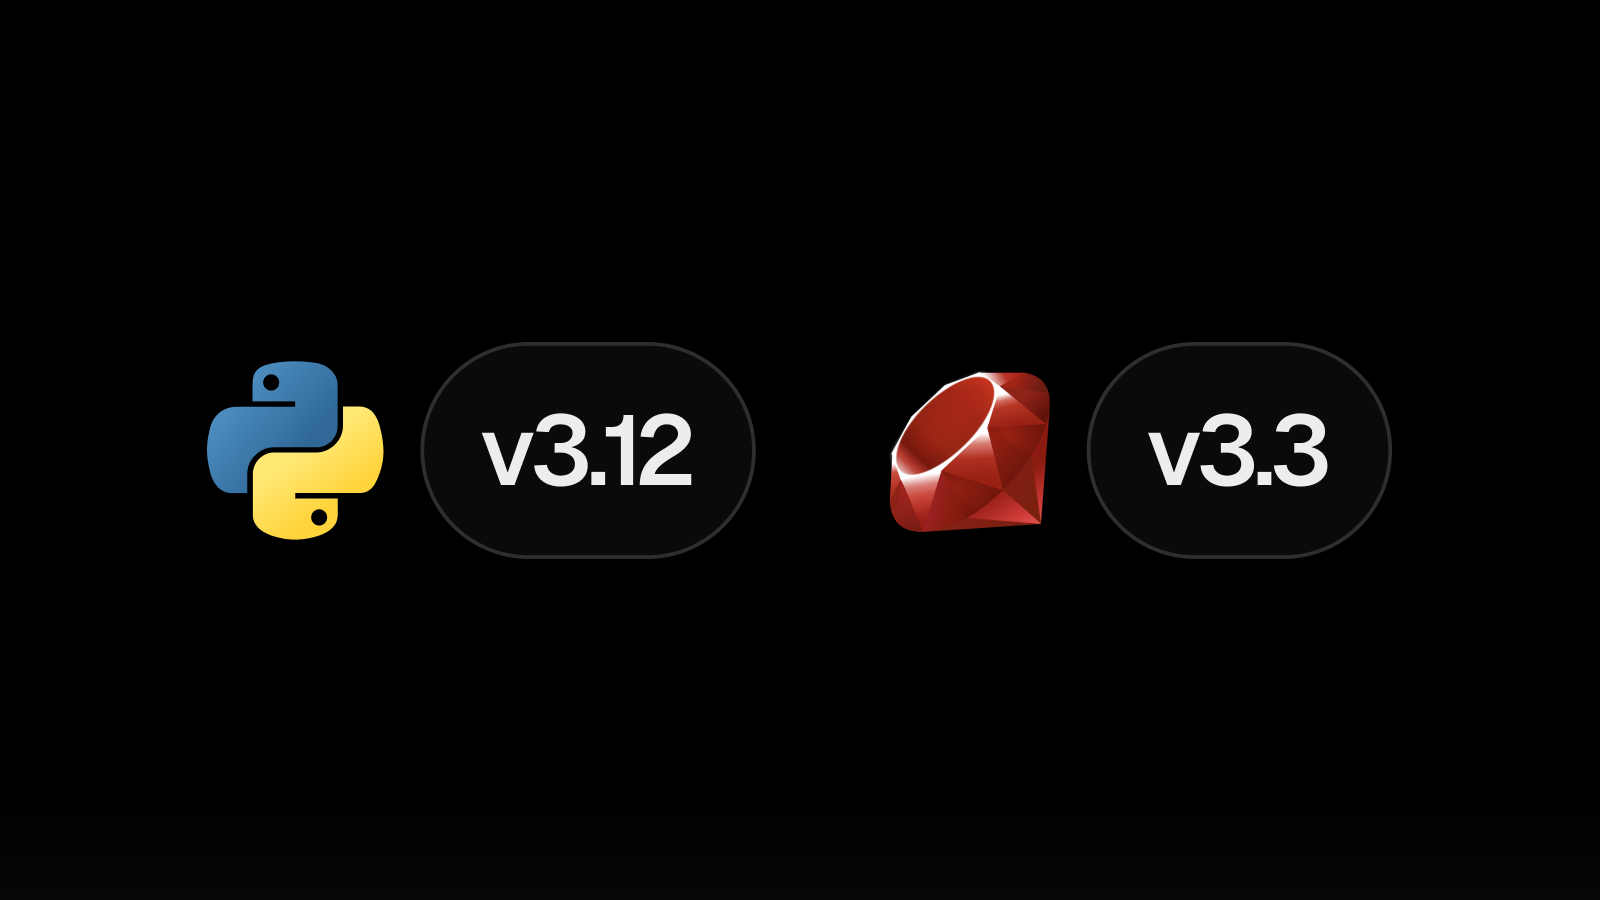 Cover for Python 3.12 and Ruby 3.3 are now available